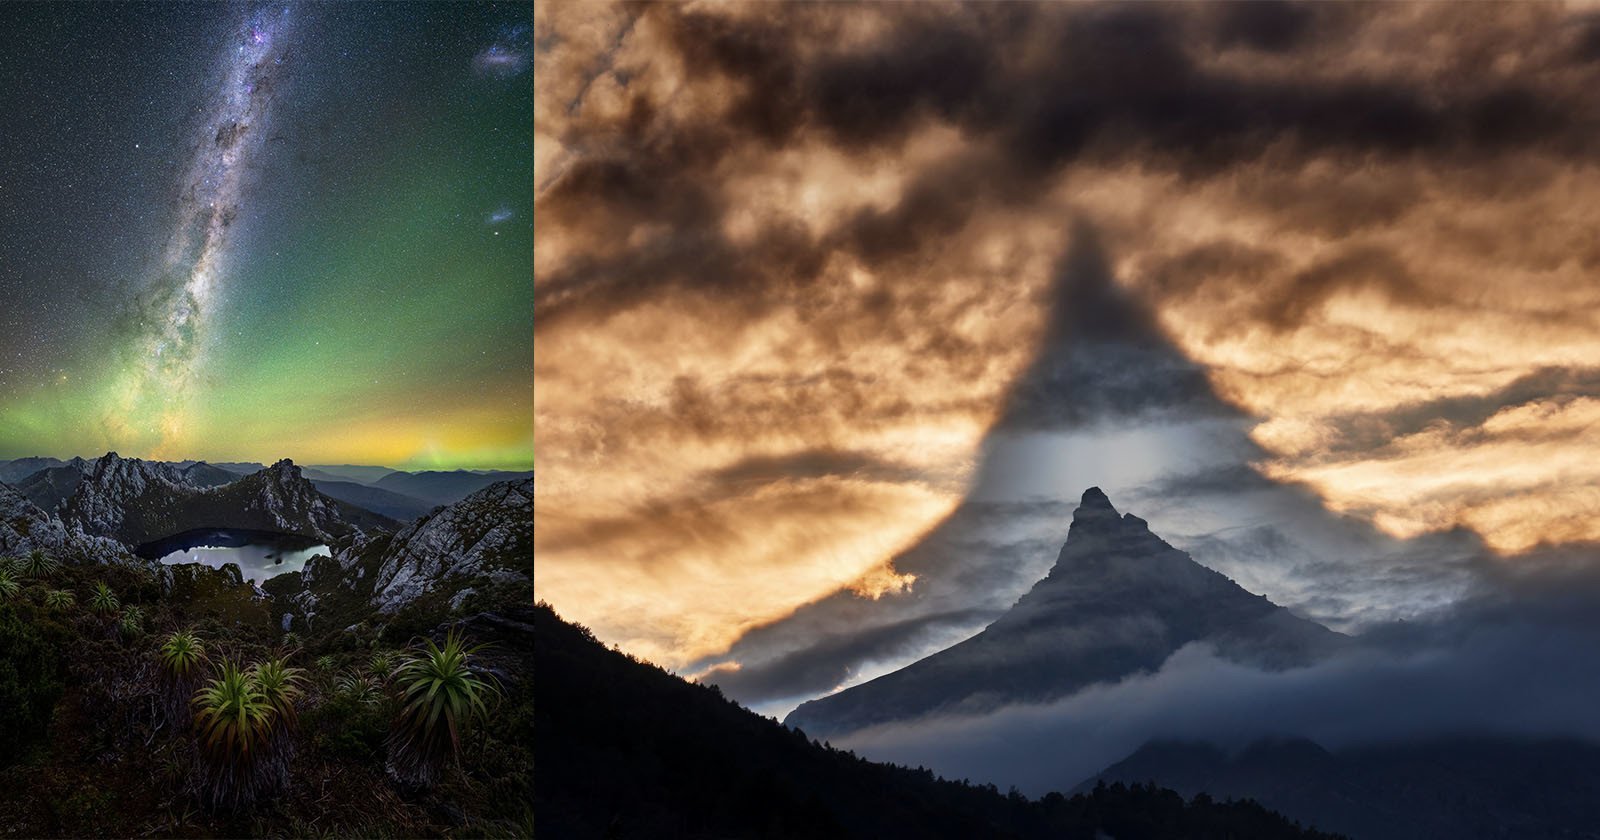 Landscape Photo Awards That Value Authenticity Announce 2022 Winners